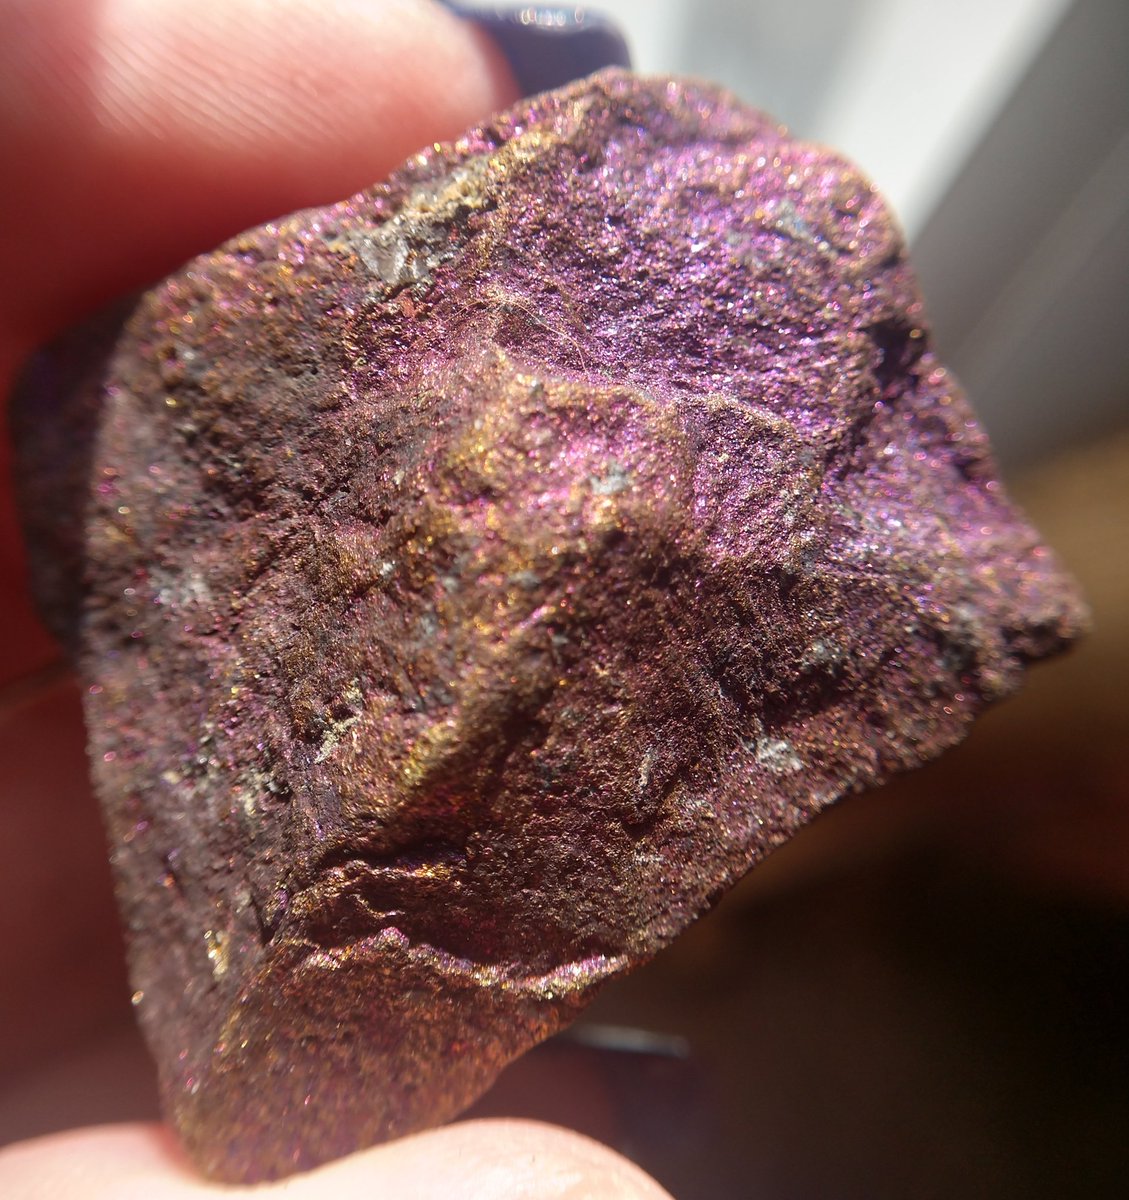 Day 5  #Rocktober  #PurpleNGL, I like rocks cause they're pretty. Like this piece of Chalcopyrite!  It's a copper iron sulfide mineral, which is typically brass yellow. This one has a purple tarnish to it, and it glitters! Thanks to  @FossilLocator for the identification. 